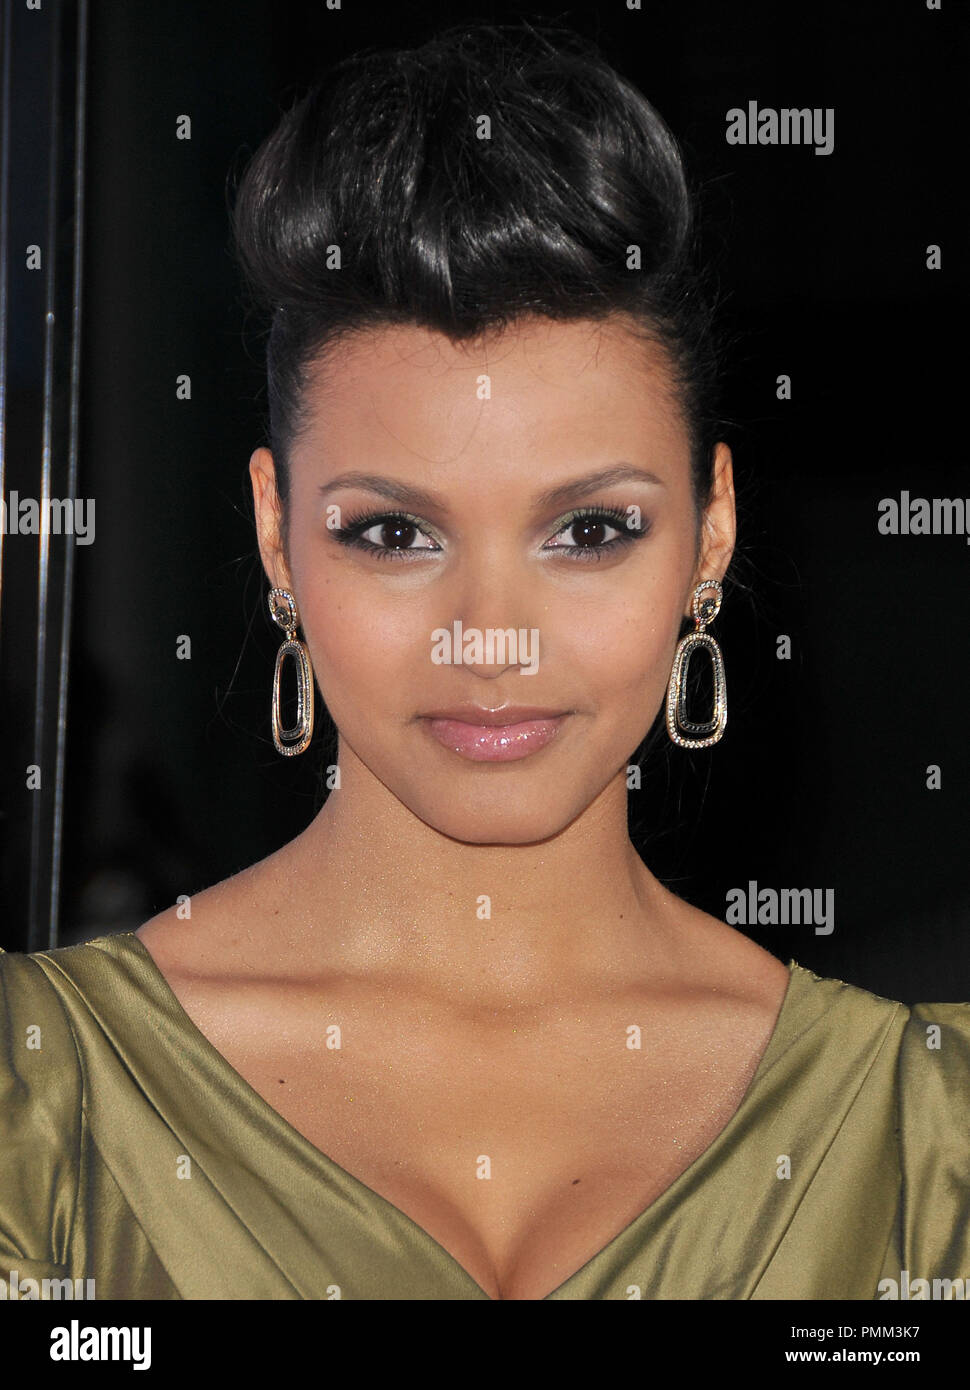 Jessica Lucas at the Los Angeles Premiere of 'Big Mommas Like Father, Like Son' held at the Arclight Cinerama Dome in Hollywood, CA. The event took place on Thursday, February 10, 2011. Photo by PRPP Pacific Rim Photo Press / PictureLux Stock Photo